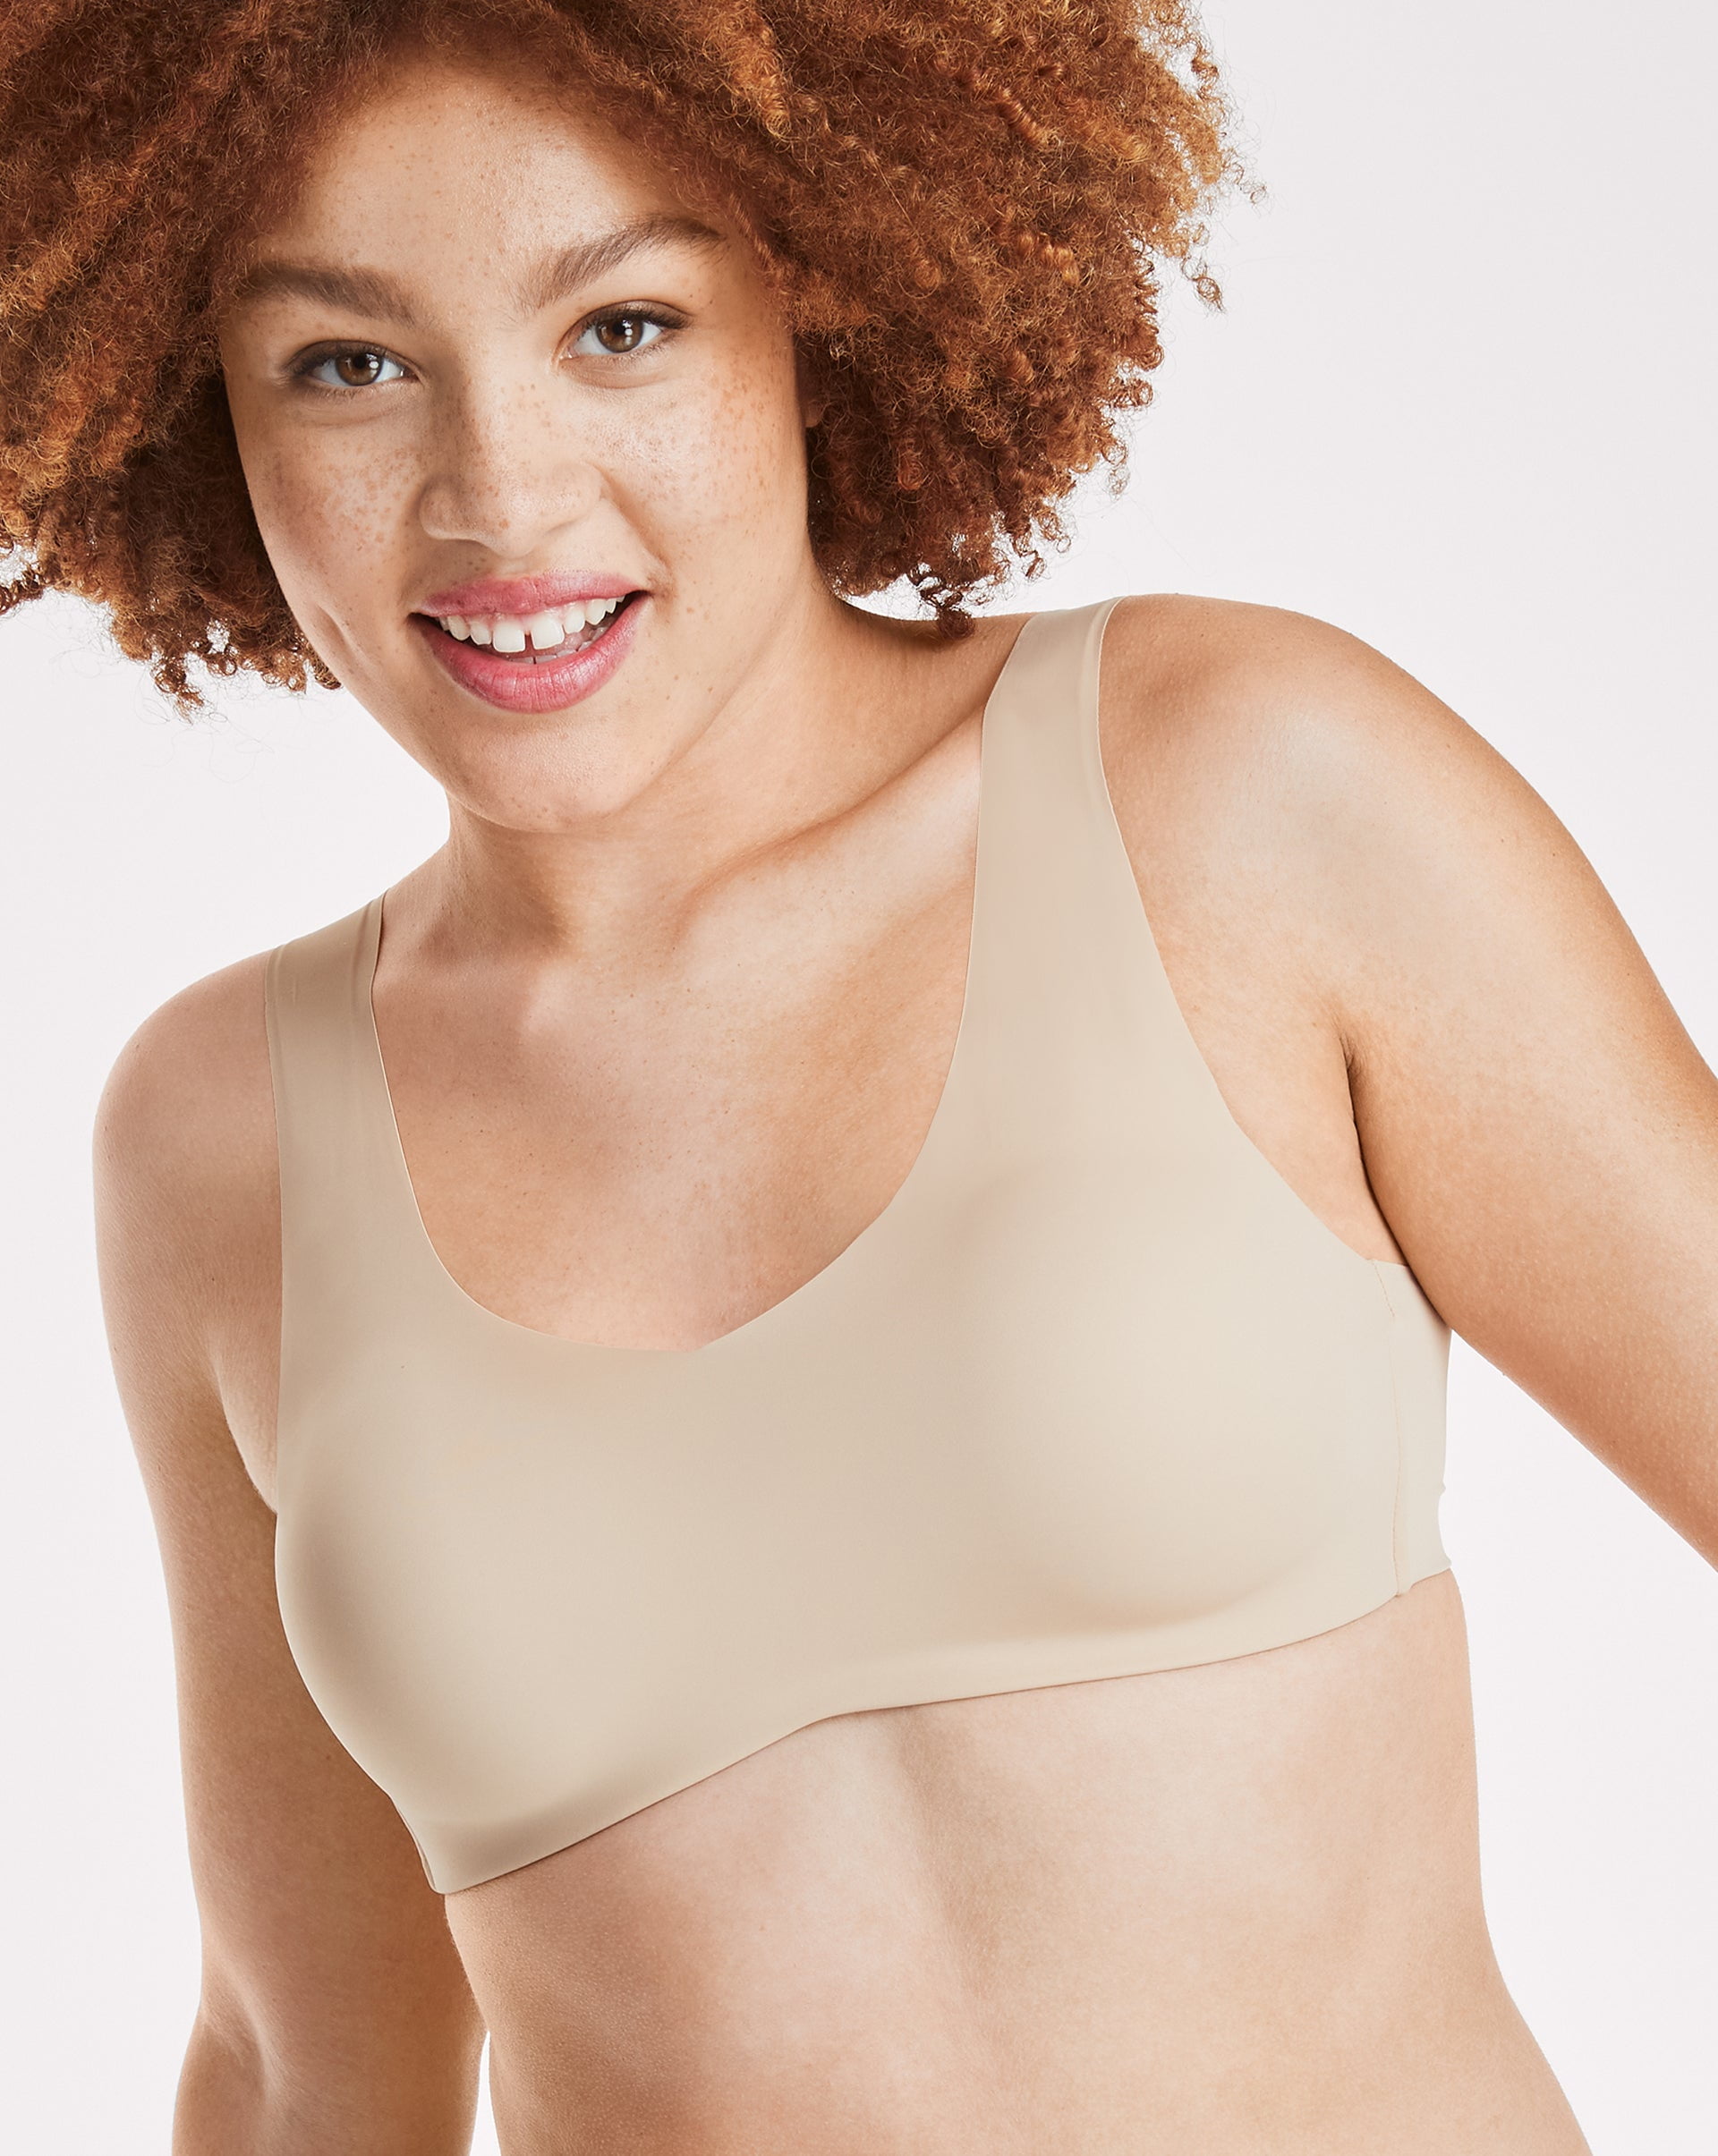 Less Expensive Hanes Ultra Light Comfort Racerback Bra DHHU43 save up to  60% off 